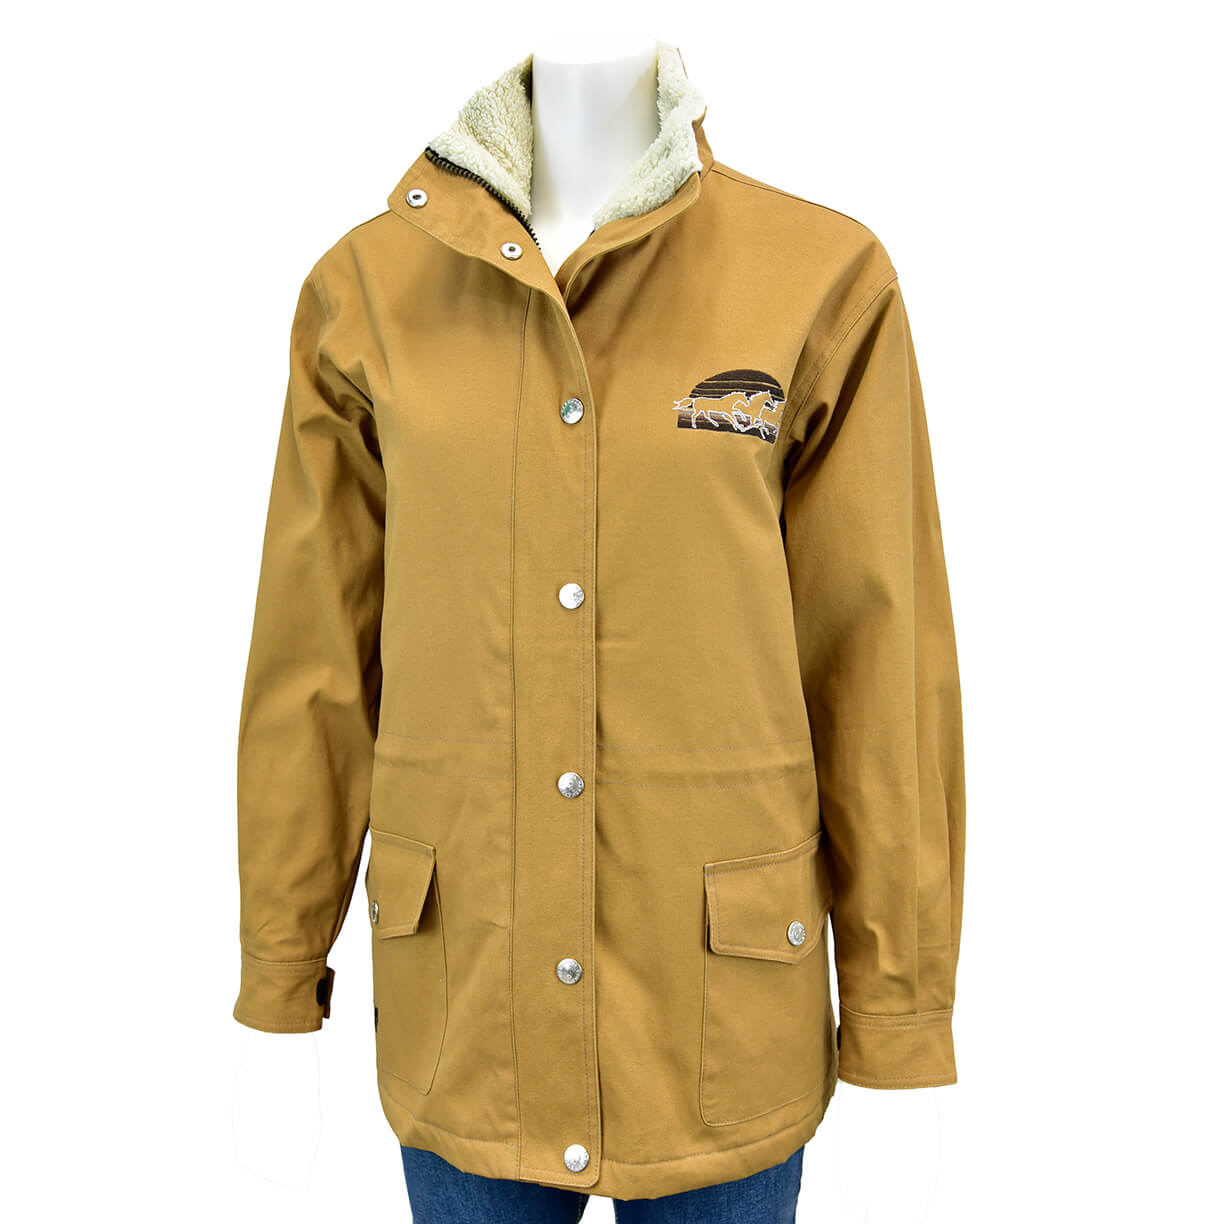 Women's Cowgirl Hardware Sunset Horse Ranch Light Brown Canvas Jacket from Cowboy Hardware